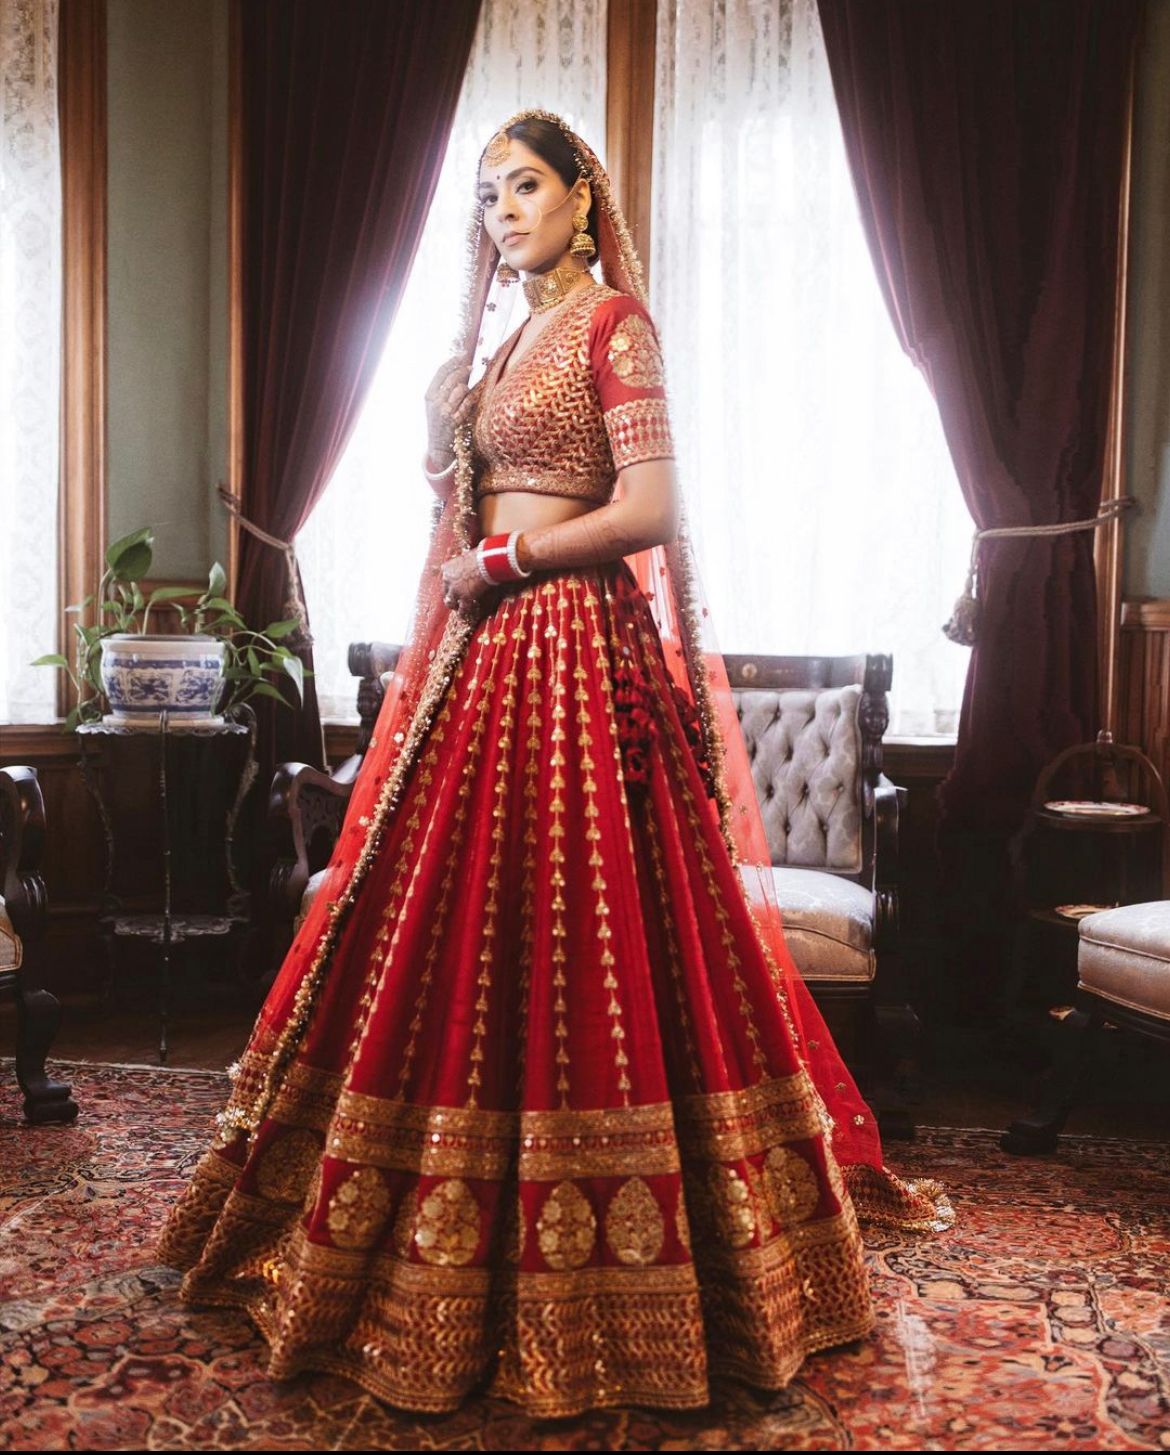 Lawyer Bride Ditched Her Black And White Court Room Outfit, To Slay In A Red  Sabyasachi 'Lehenga'